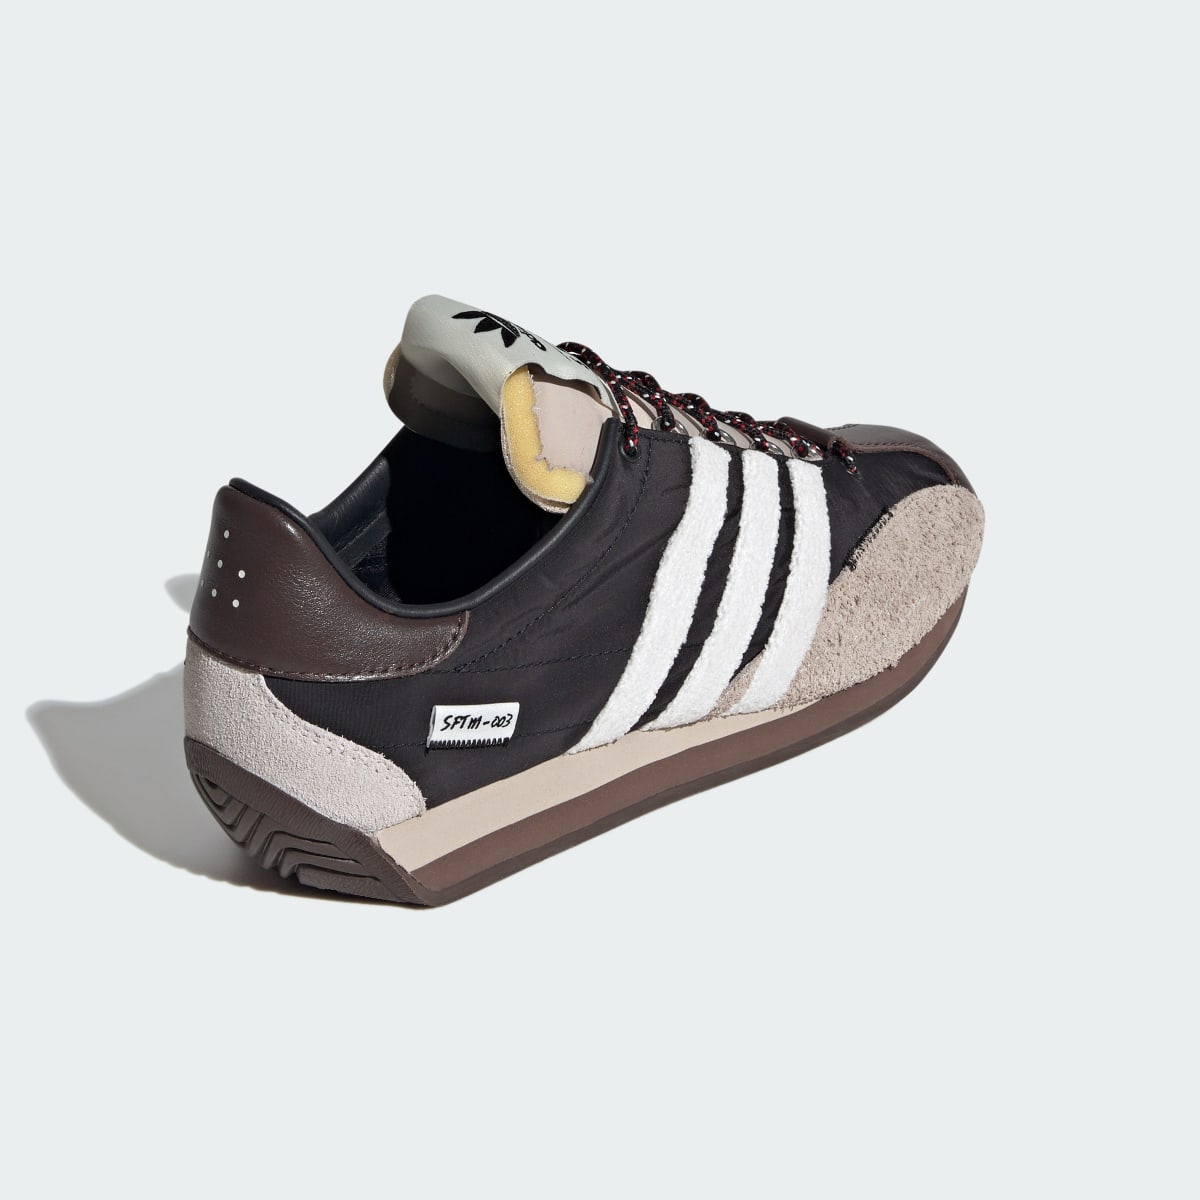 Adidas SFTM Country OG Low Trainers. 7